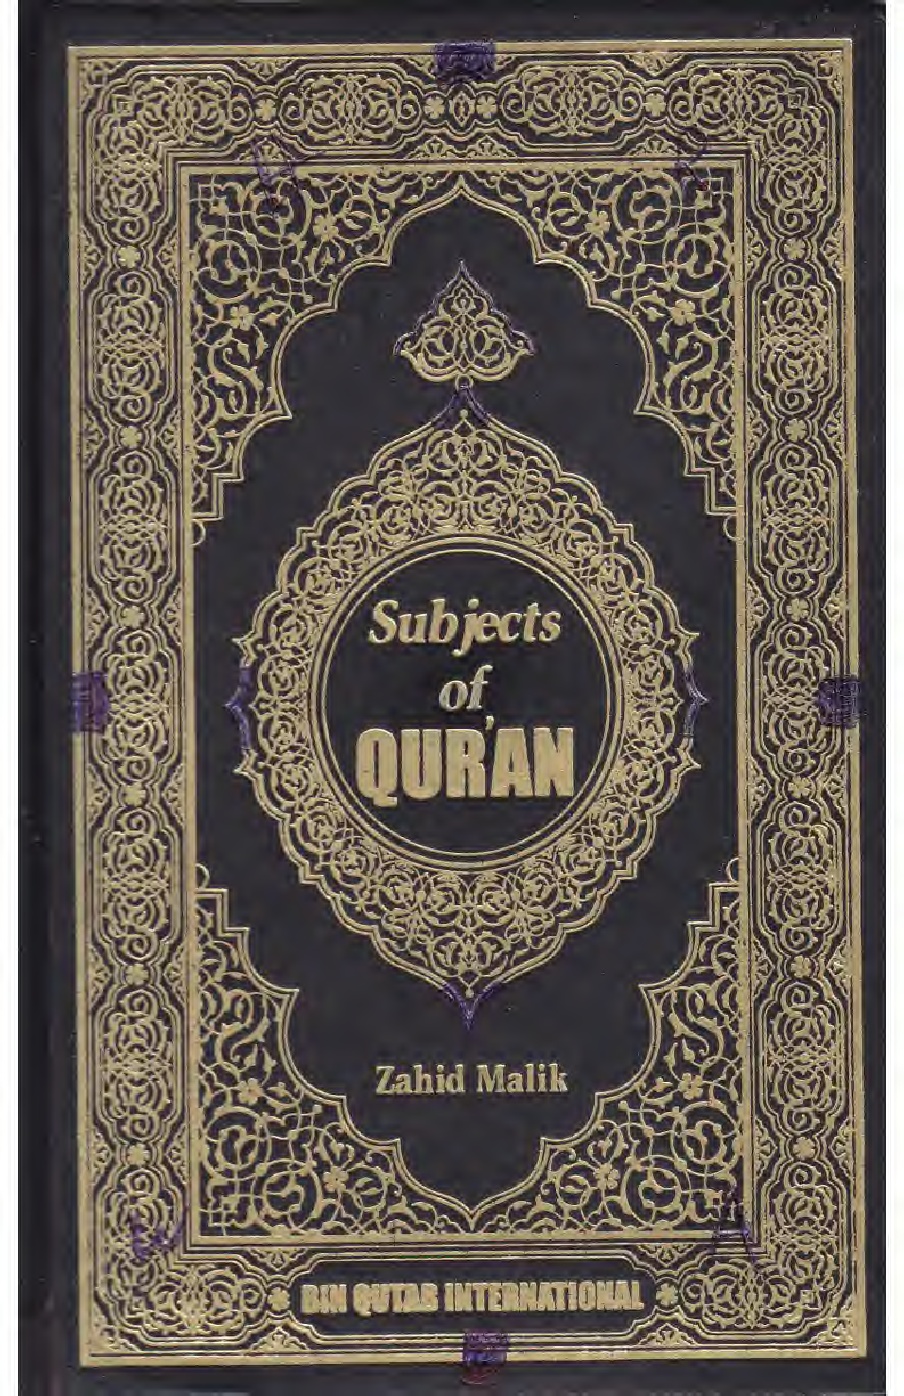 Subjects of Quran by Zahid Malik